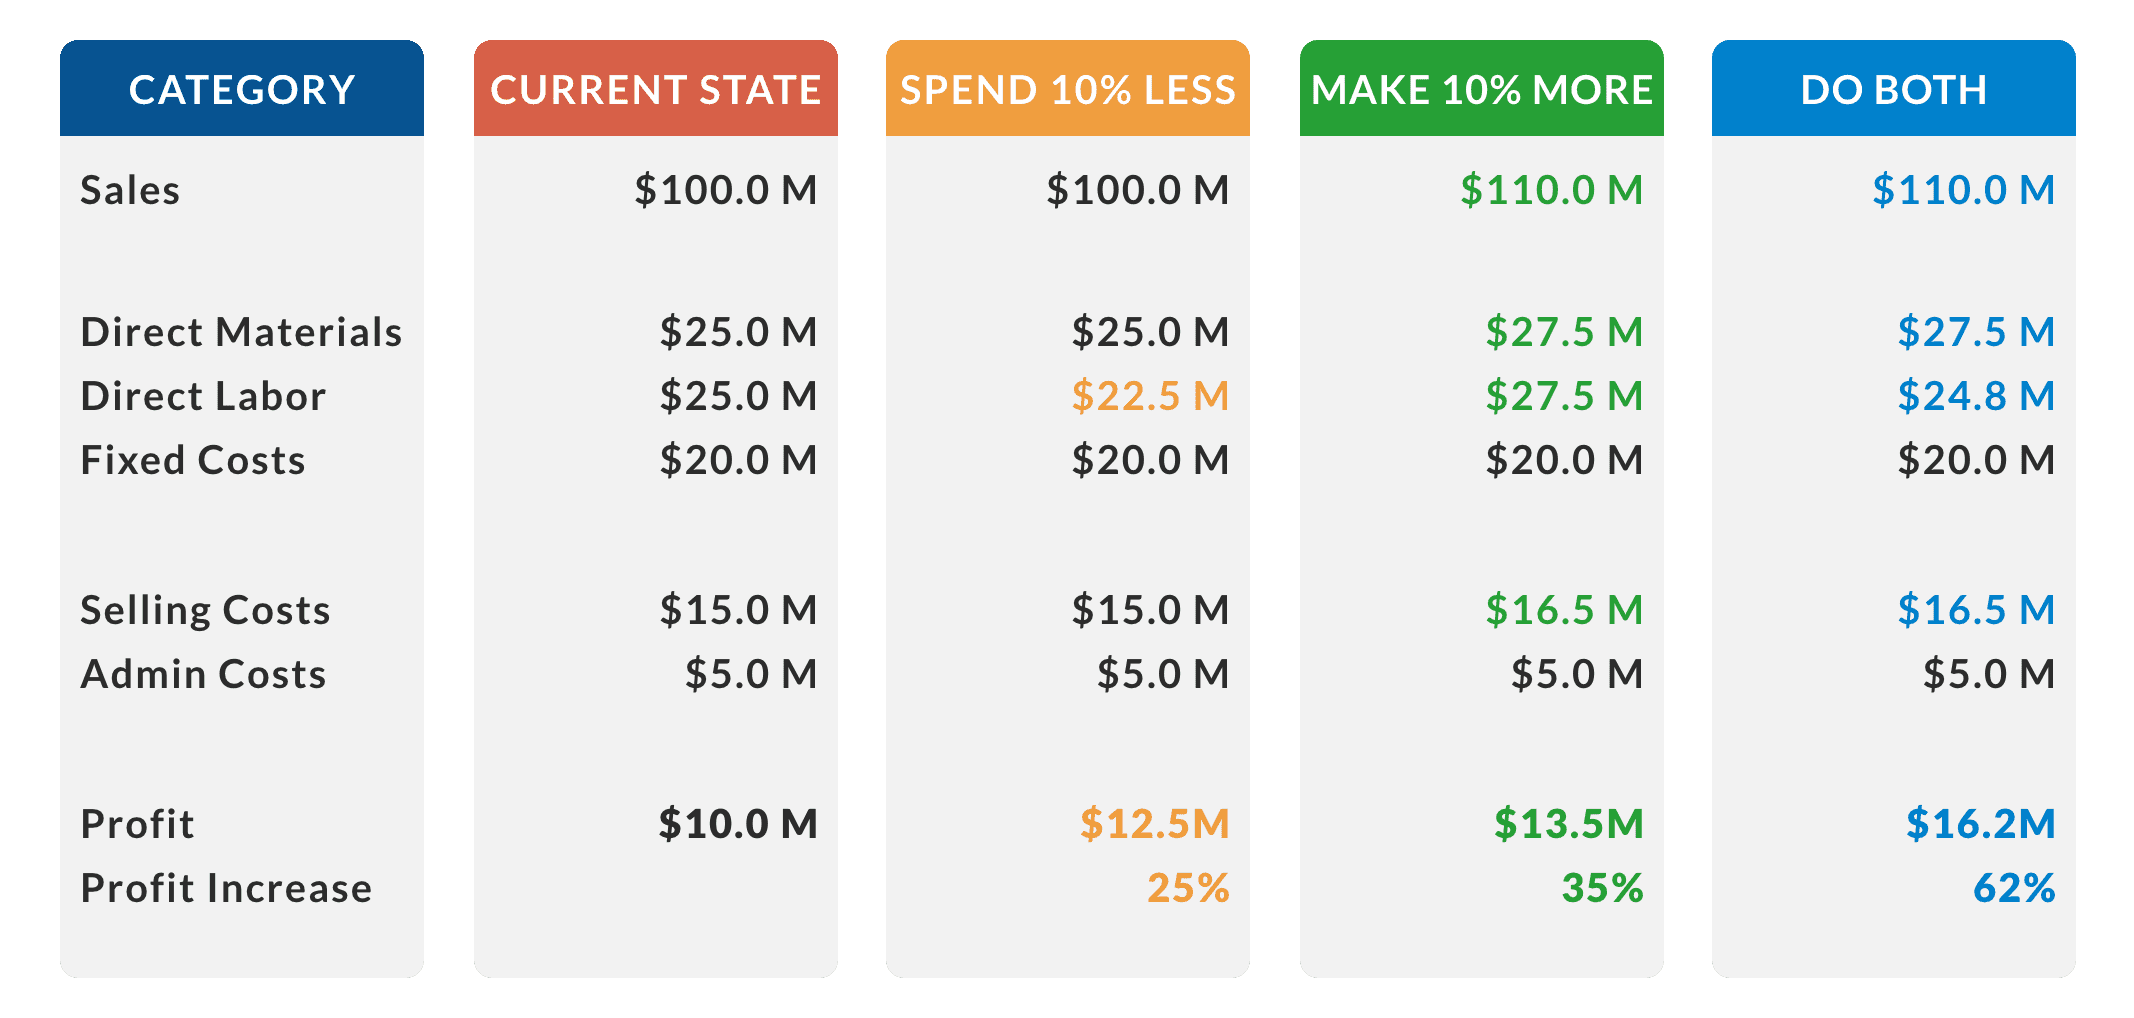 Table showing you can increase profits by 62% by spending 10% less and making 10% more.